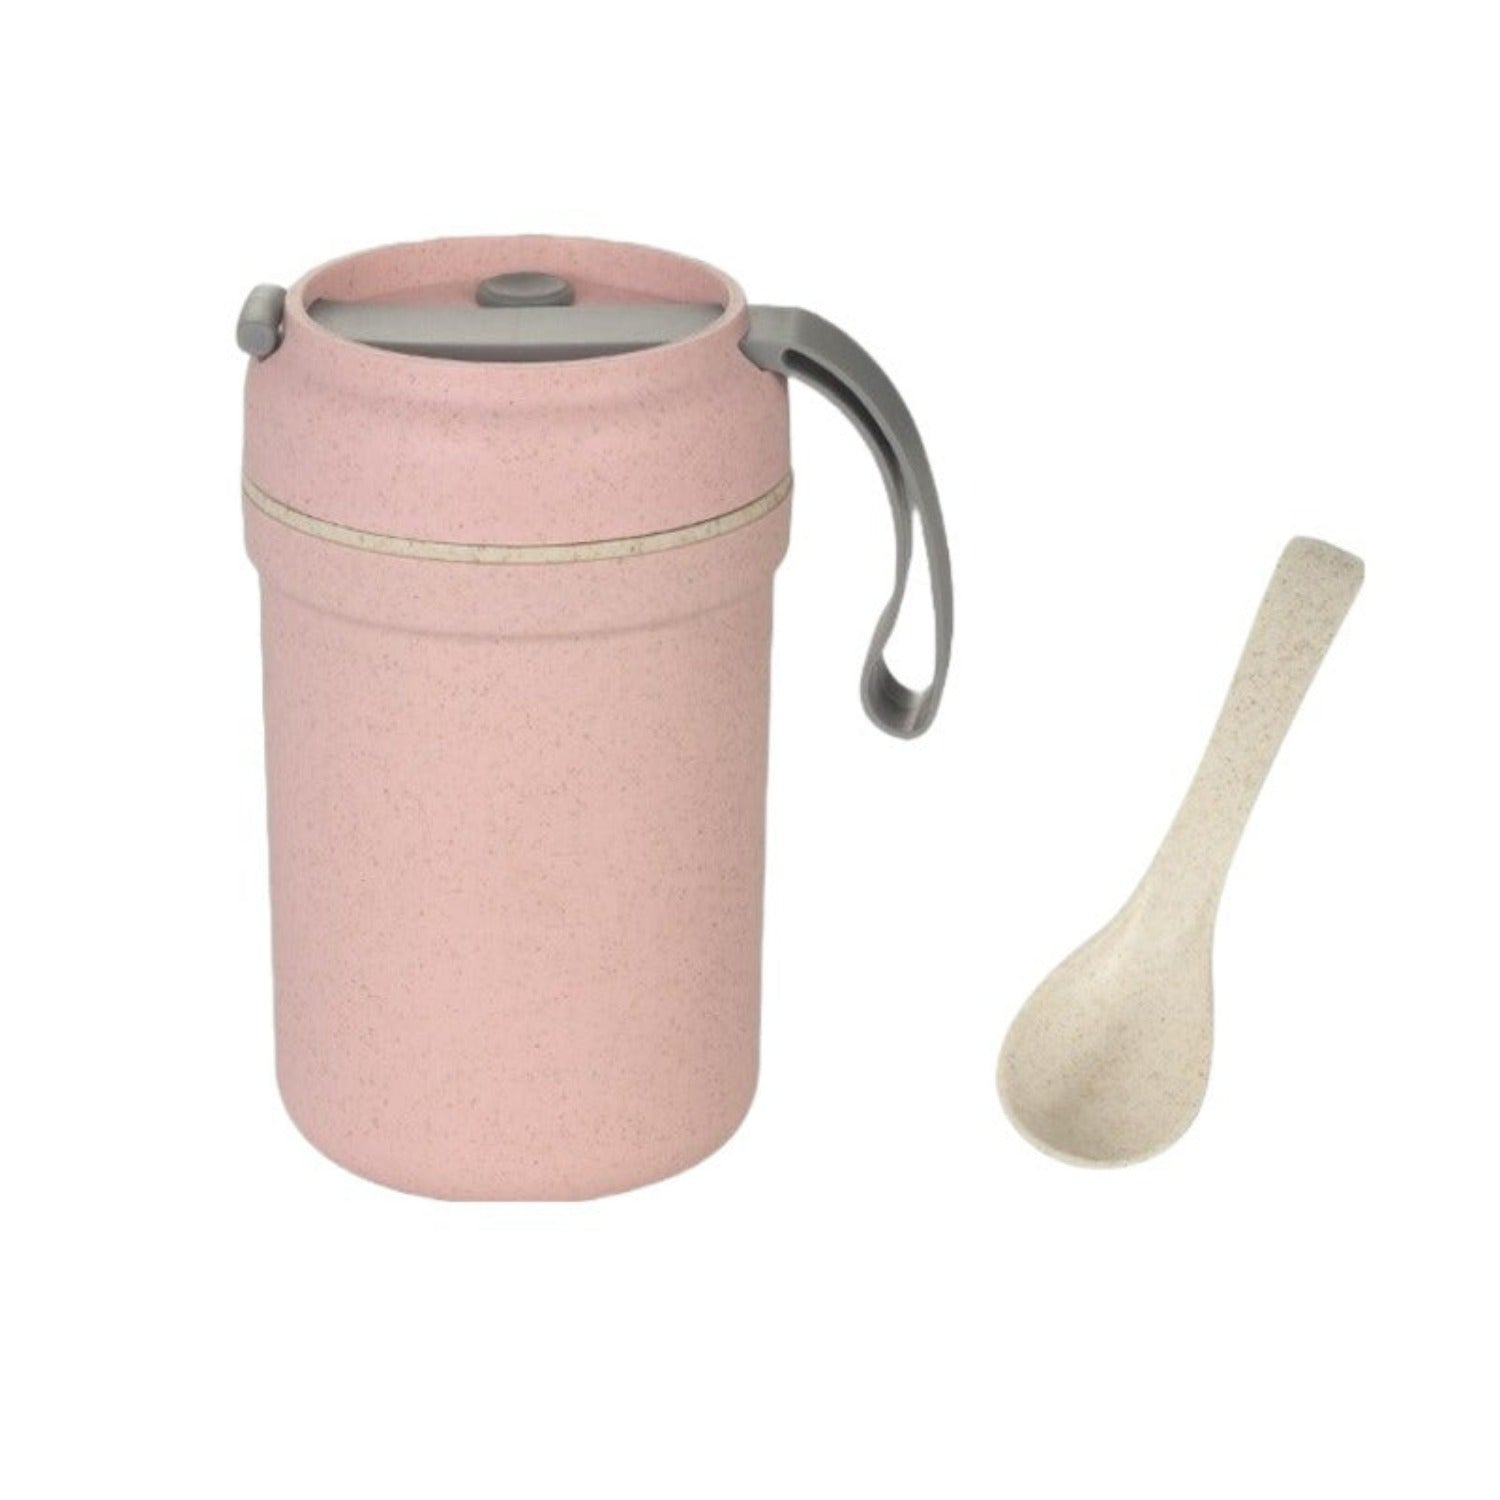 Wheat Straw Microwavable Lunch Box Thermos with Spoon 330ml Pink